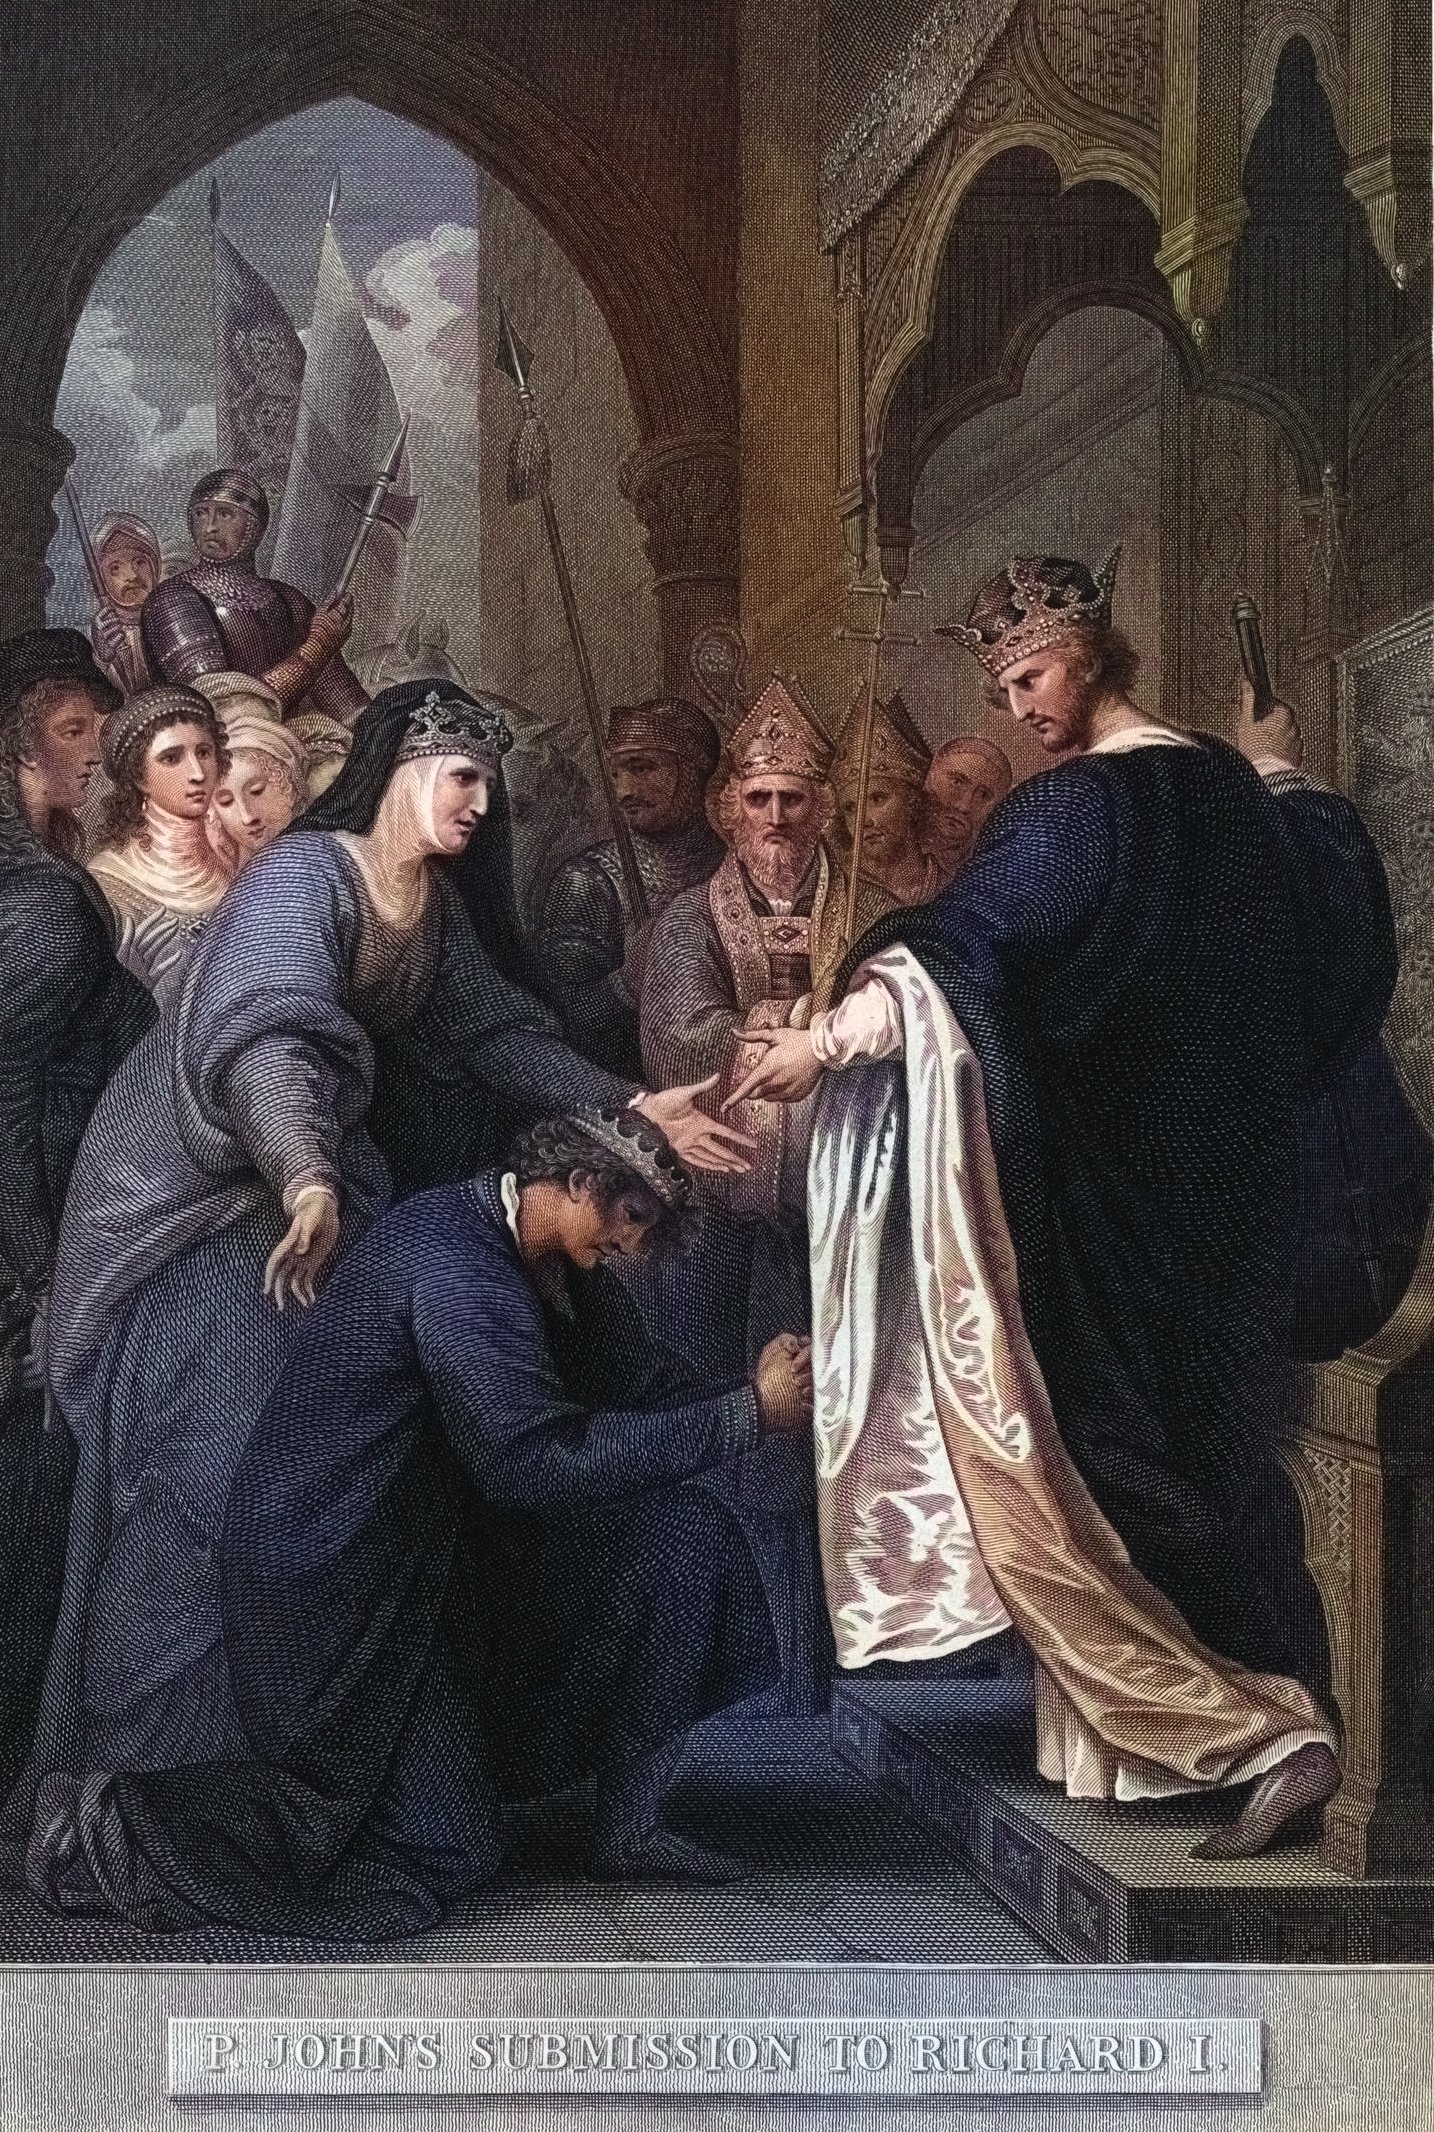 In the 1795 engraving and etching by Benjamin West, Eleanor presents John to his brother, the Prince kneeling in supplication while King Richard I stands at his throne with a stern expression, pointing. Court members, including a prelate, gather before an arch in the background.